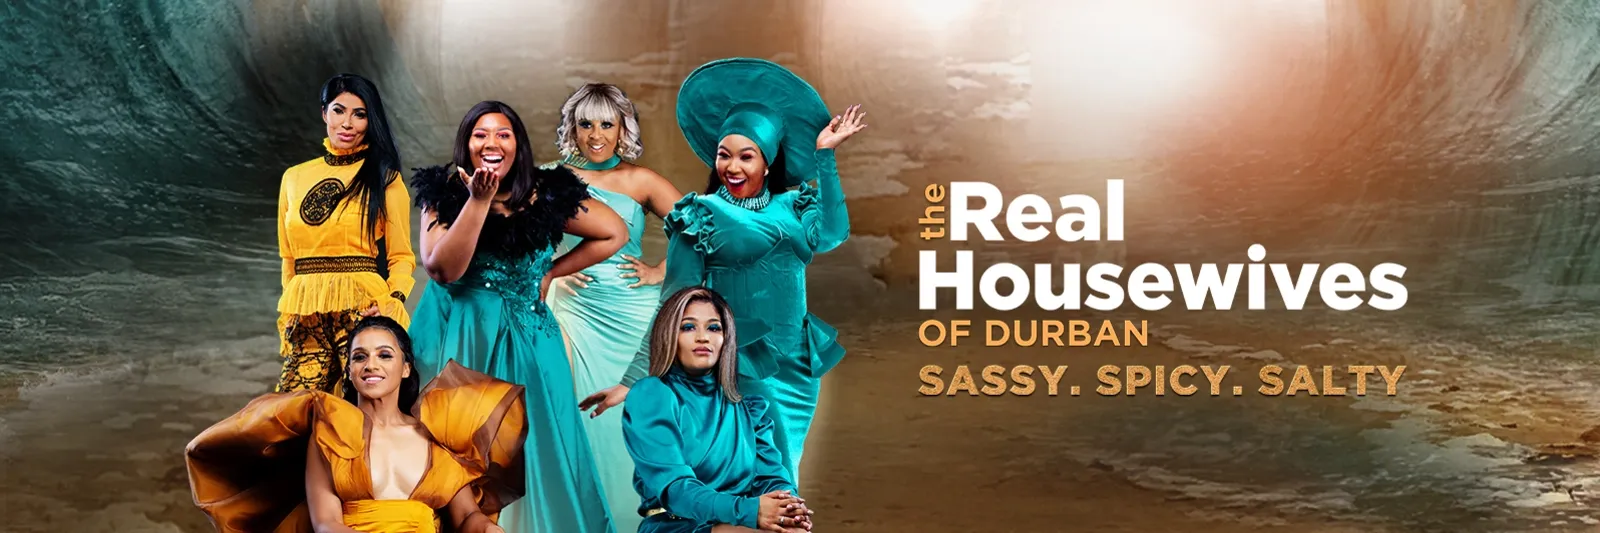 The Real Housewives Of Durban S04 (Episode 10 - 12 Added) 15